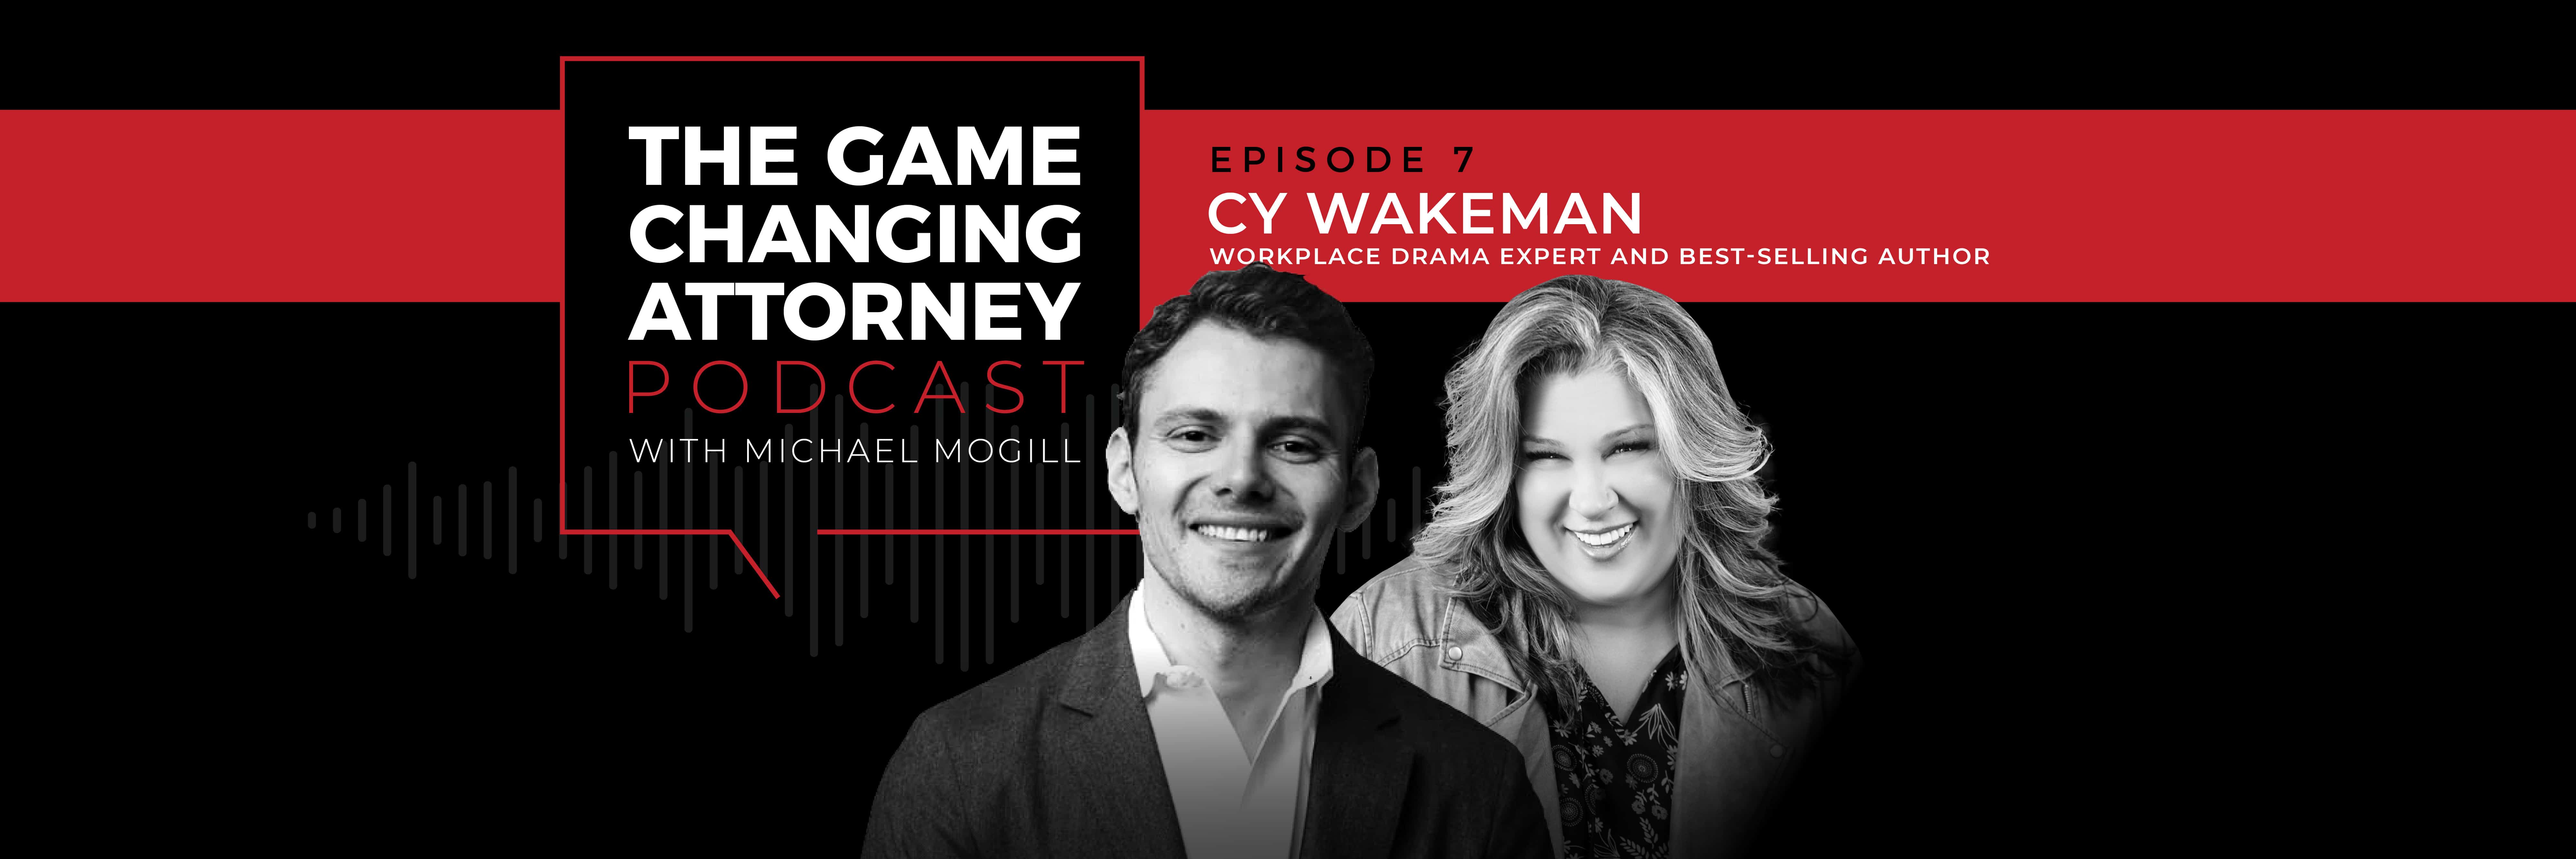 Cy Wakeman - The Game Changing Attorney Podcast Desktop